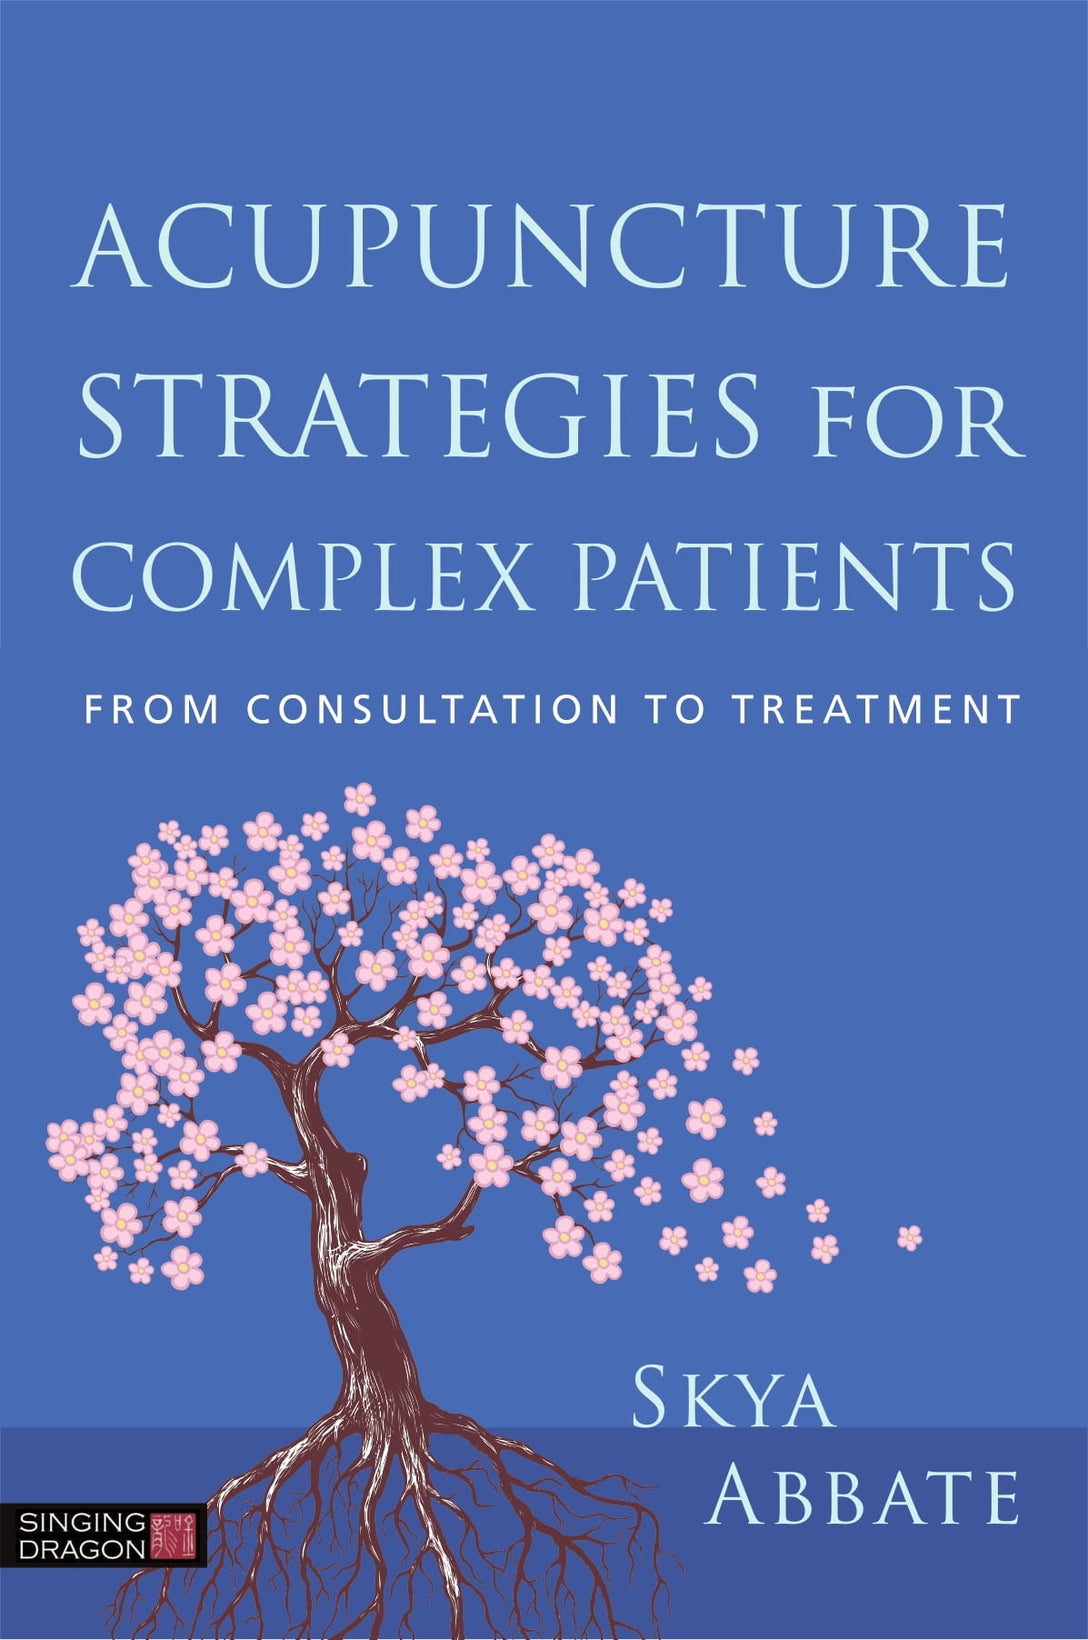 Acupuncture Strategies for Complex Patients by Skya Abbate